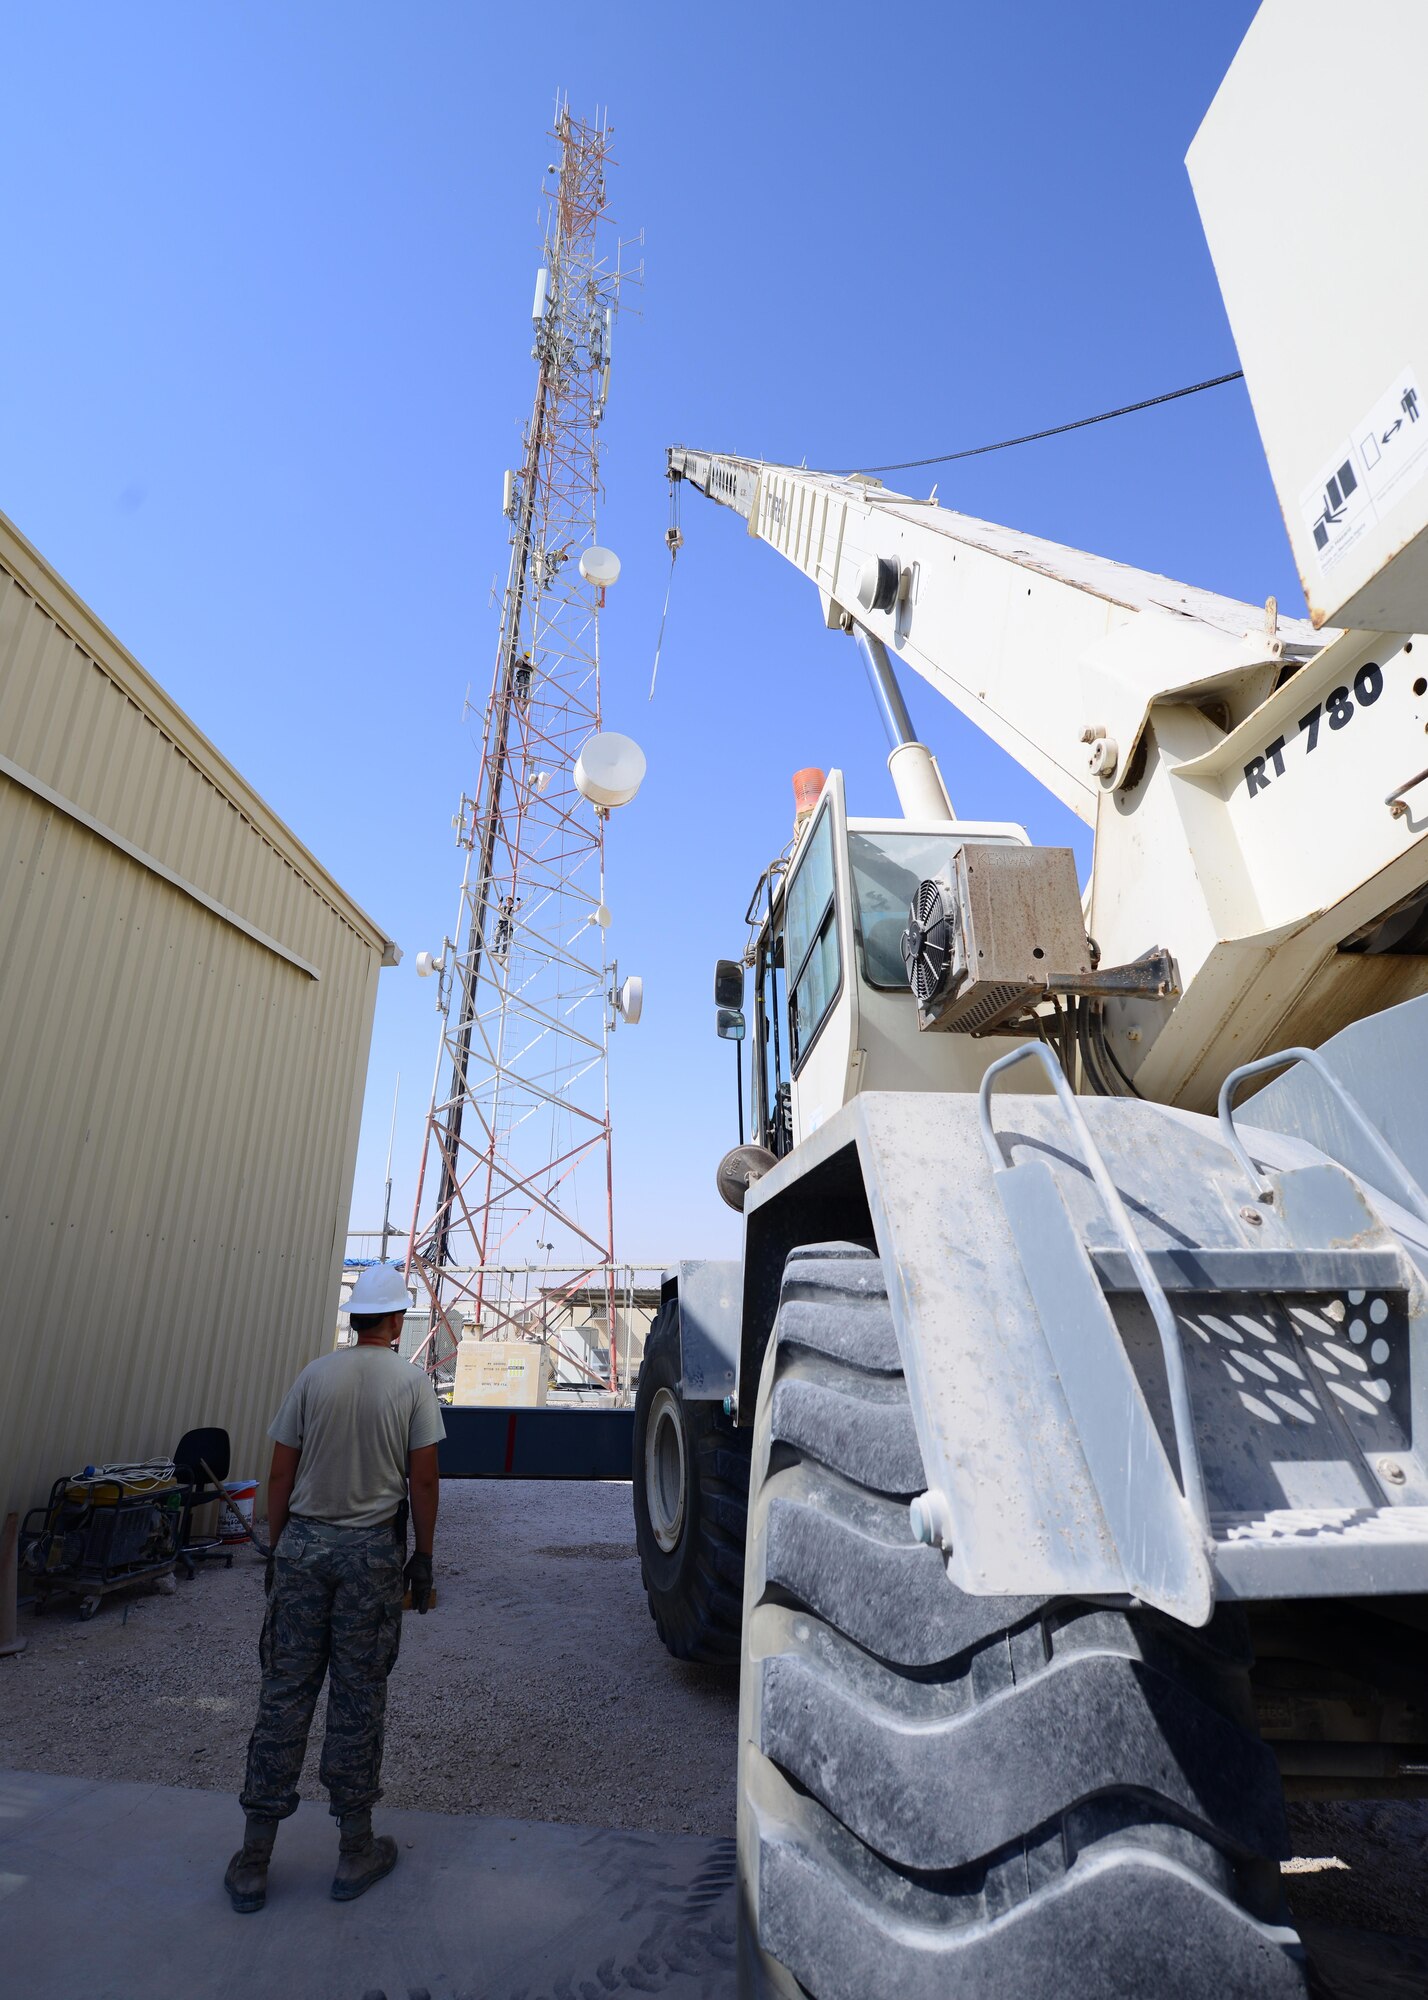 Airmen from the 379th Expeditionary Communications Squadron and 379th Expeditionary Civil Engineer Squadron work together to take down several inactive microwave dish transmitters from a radio tower Oct. 8, 2016, at Al Udeid Air Base, Qatar. The transmitters, weighing up to 200 pounds each, required the use of a Terex RT 780 crane in order to bring them down from the tower safely. (U.S Air Force photo/Senior Airman Miles Wilson/Released)